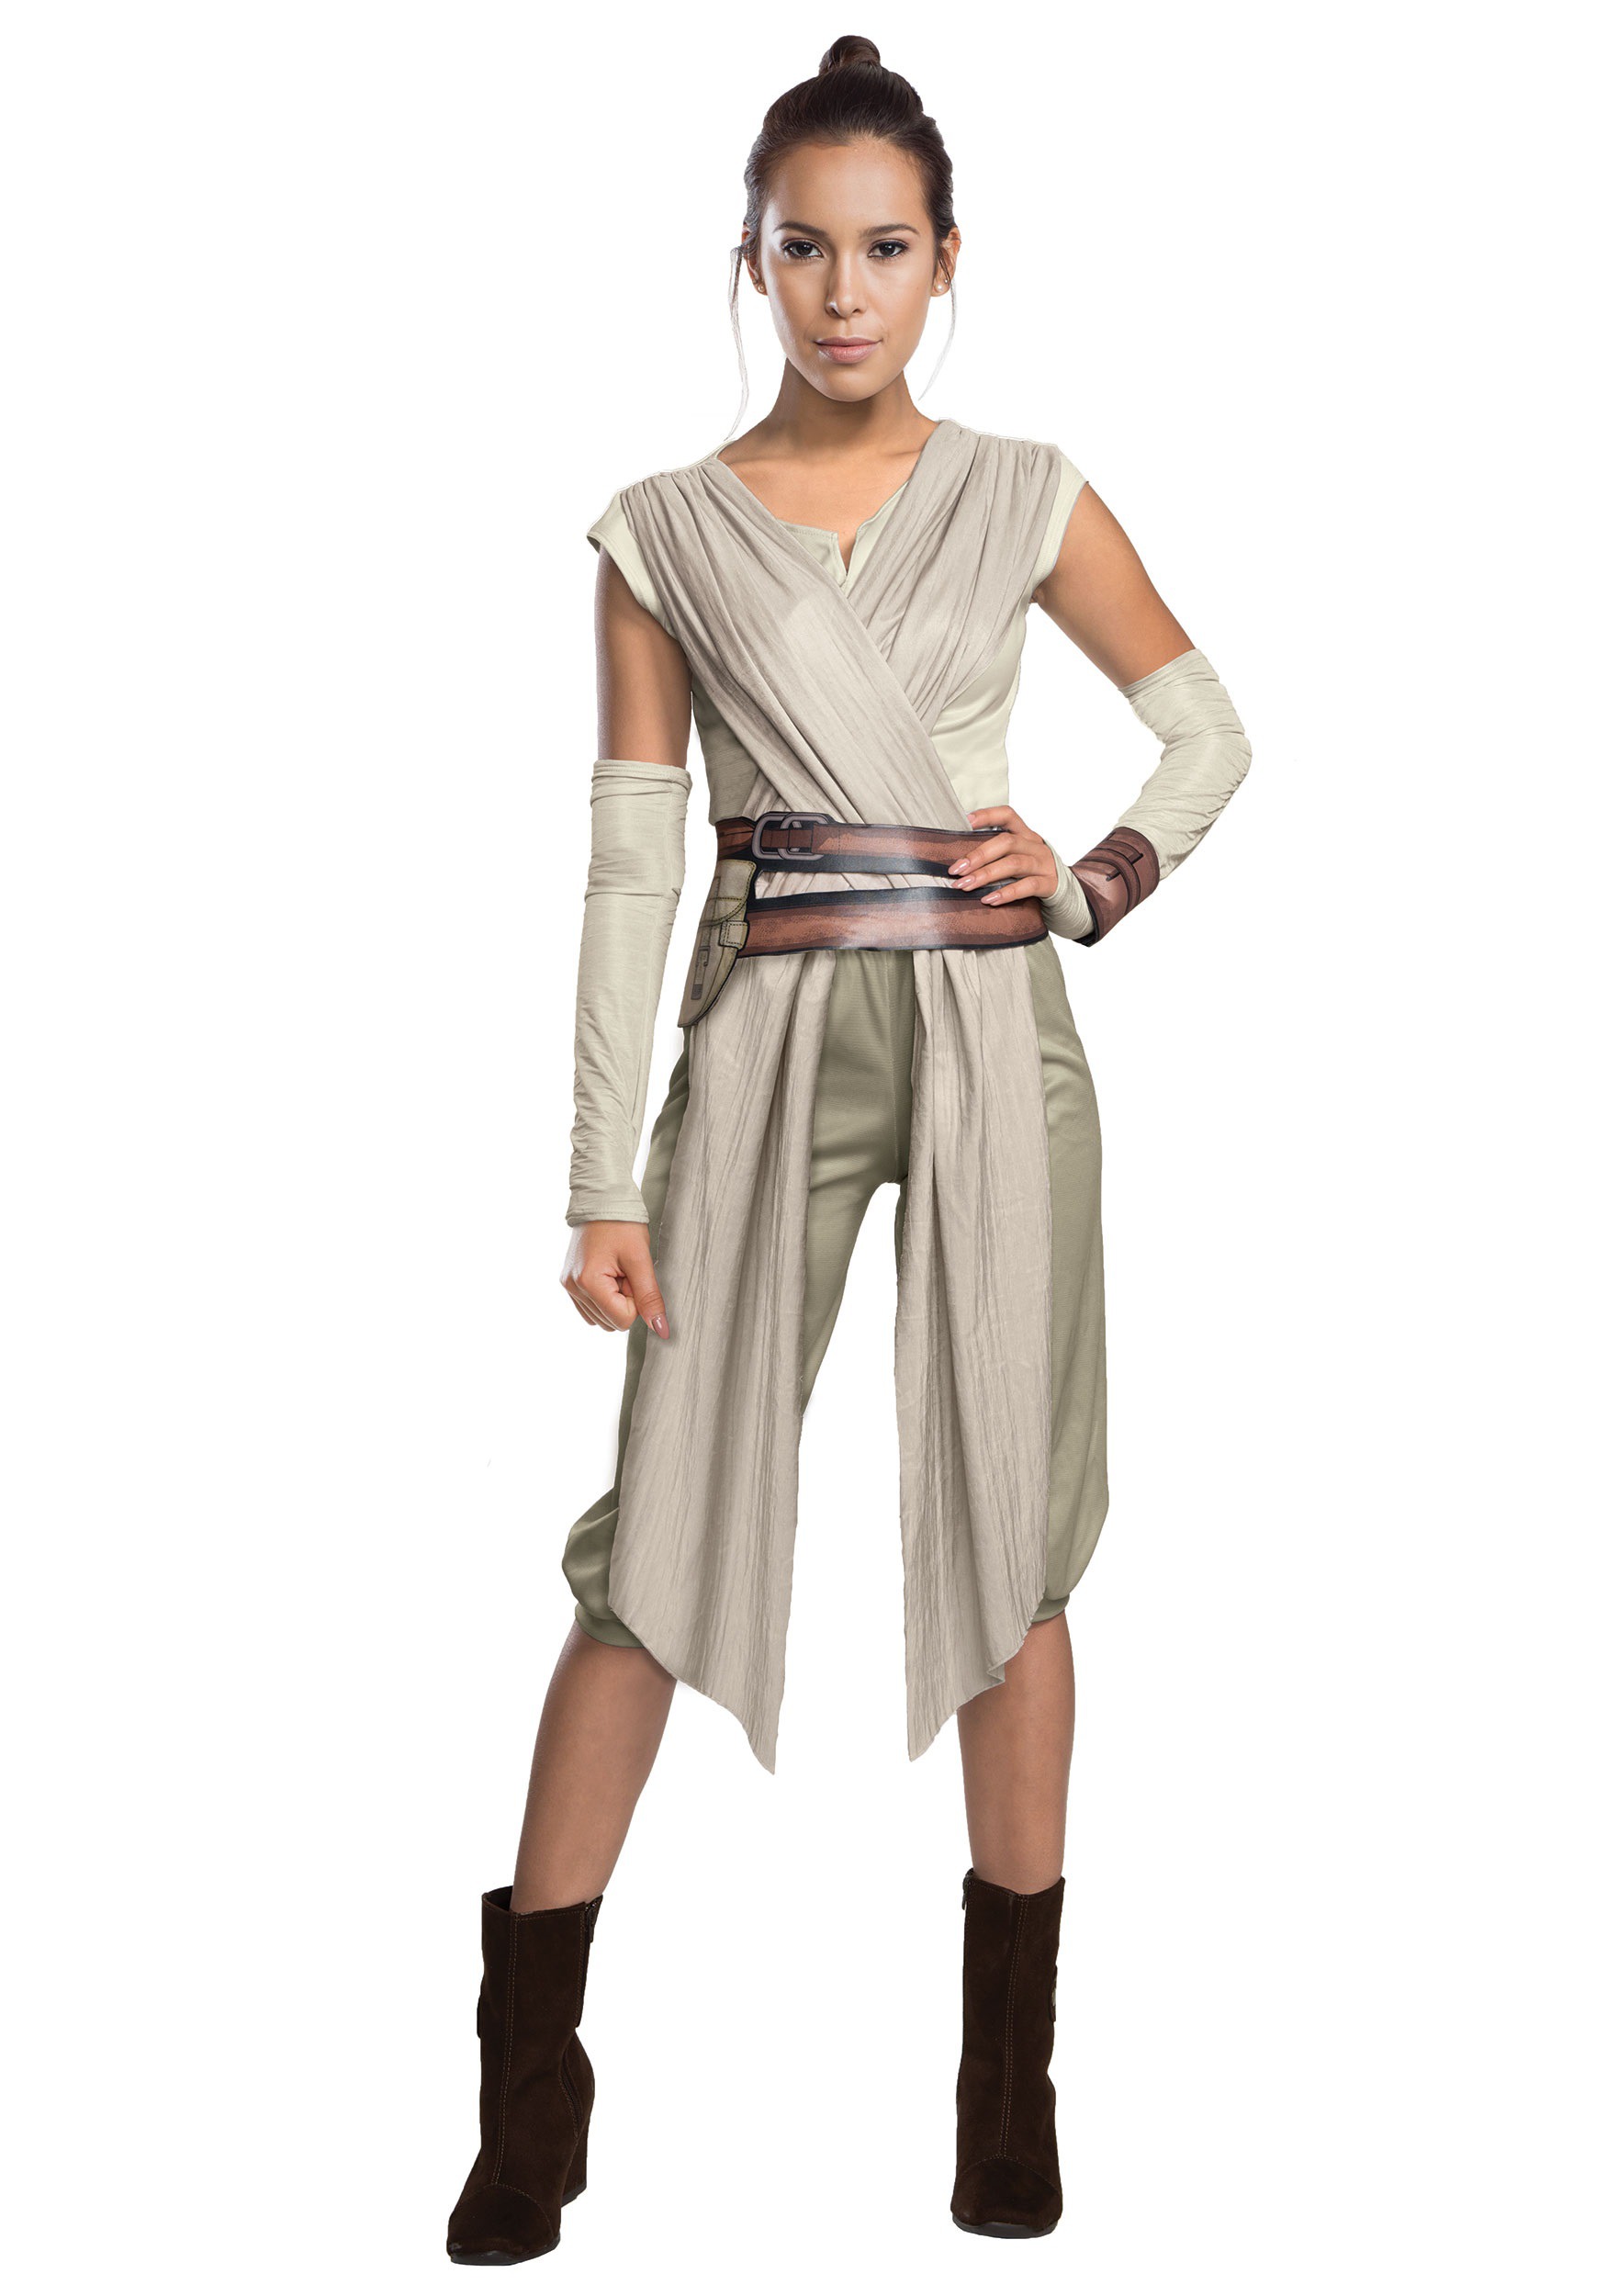 images of rey from star wars